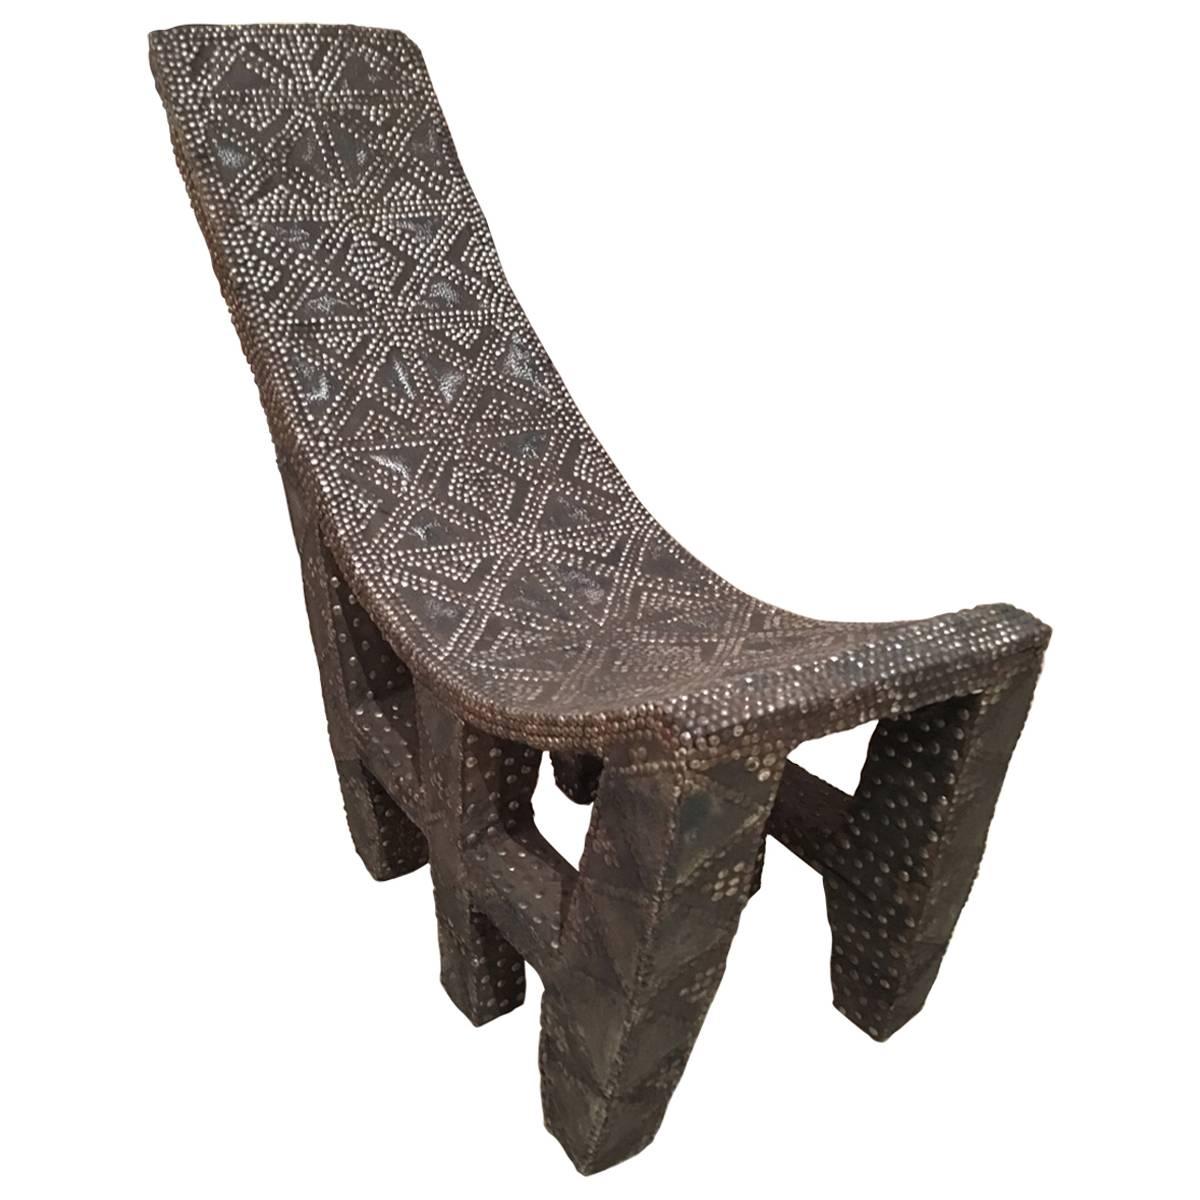 Late 19th Century African Studded Chair